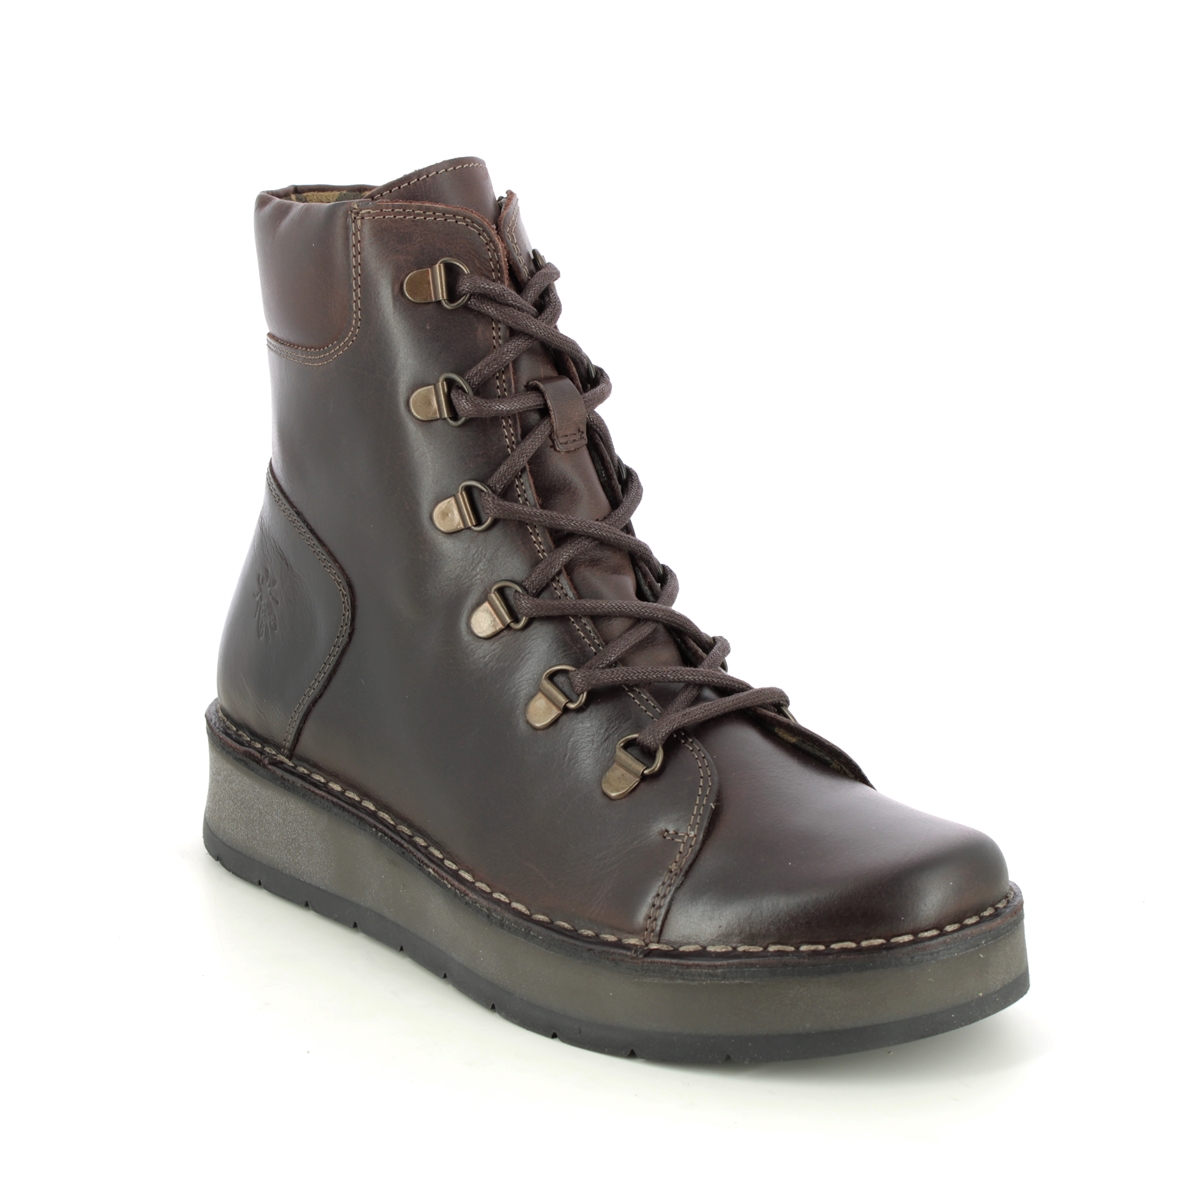 Fly London Roxy  Ravi Brown leather Womens Lace Up Boots P211094-001 in a Plain Leather in Size 38